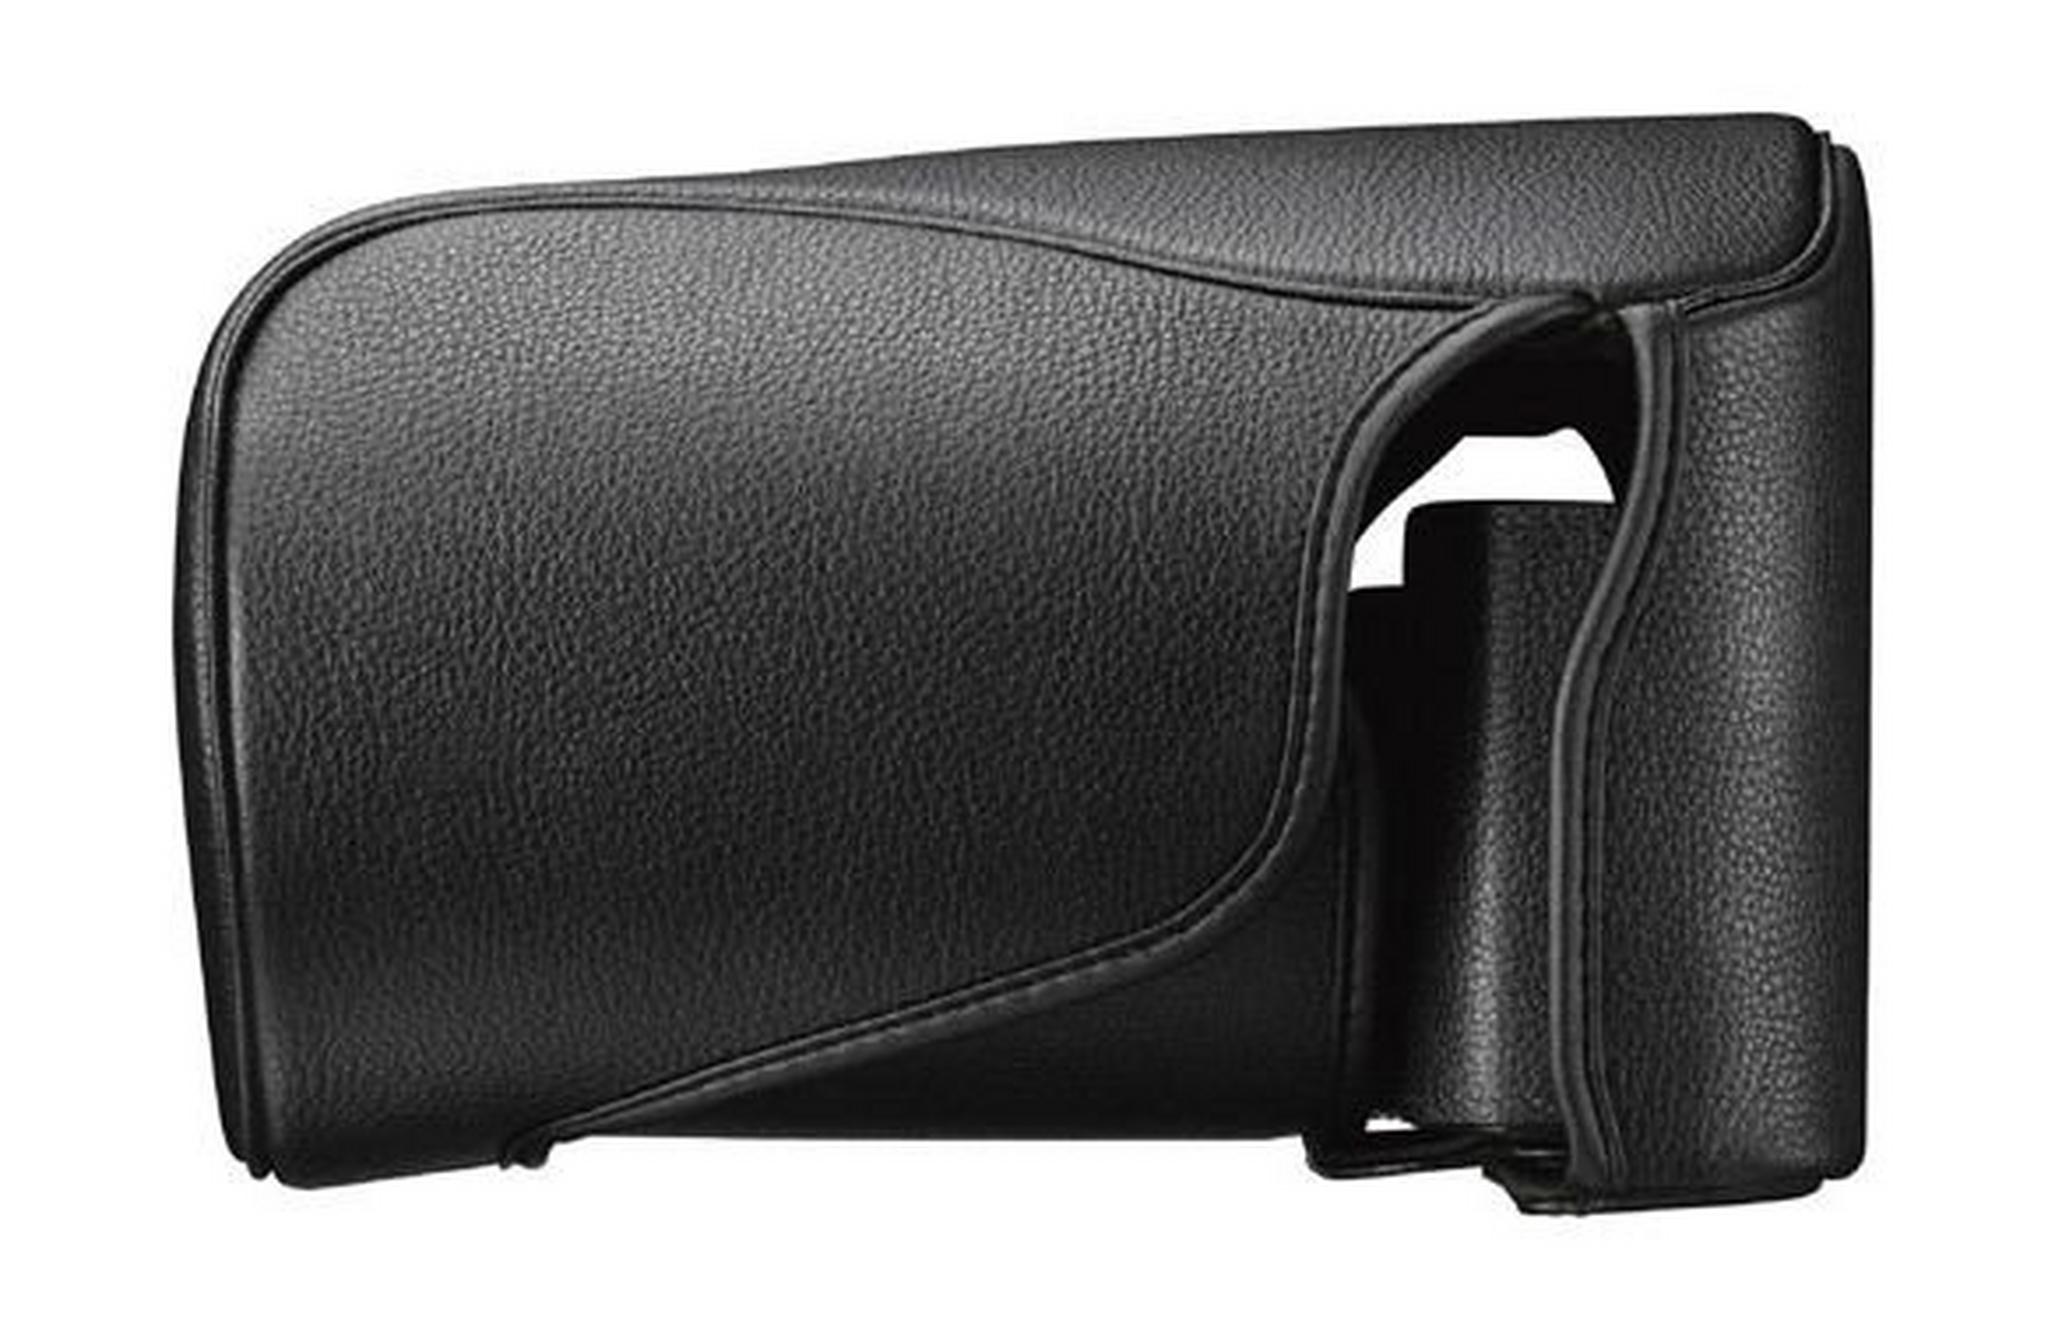 Sony Soft Carrying Case For Alpha A7II, A7RII,A7SII – Black